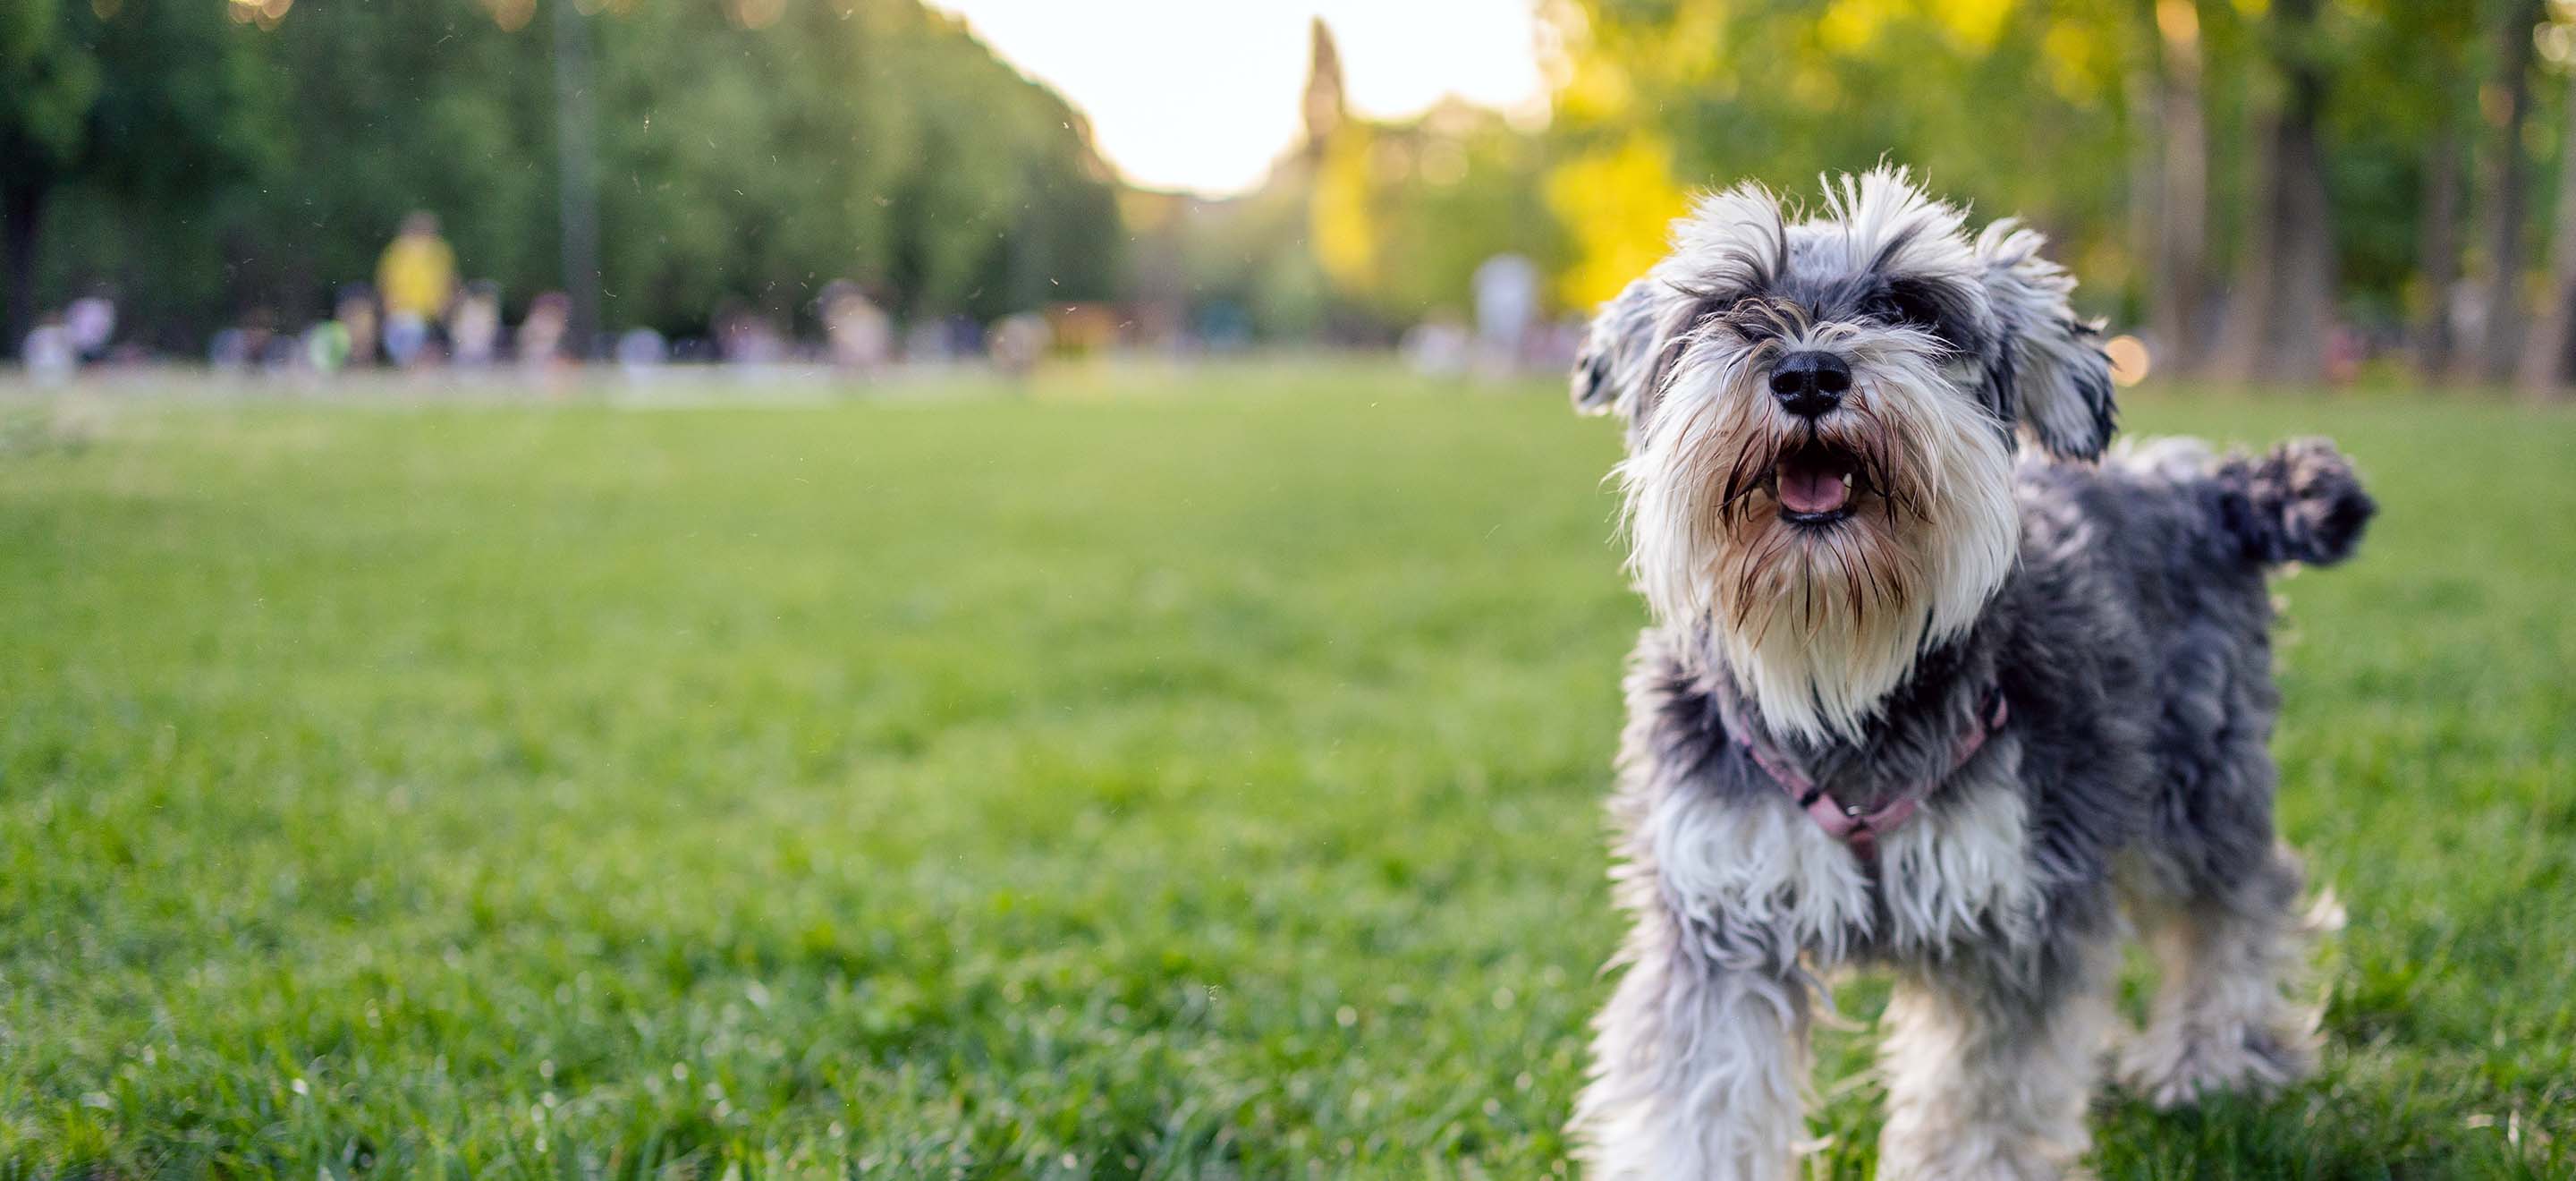 A Miniature Schnauzer dog standing in a field at the park image